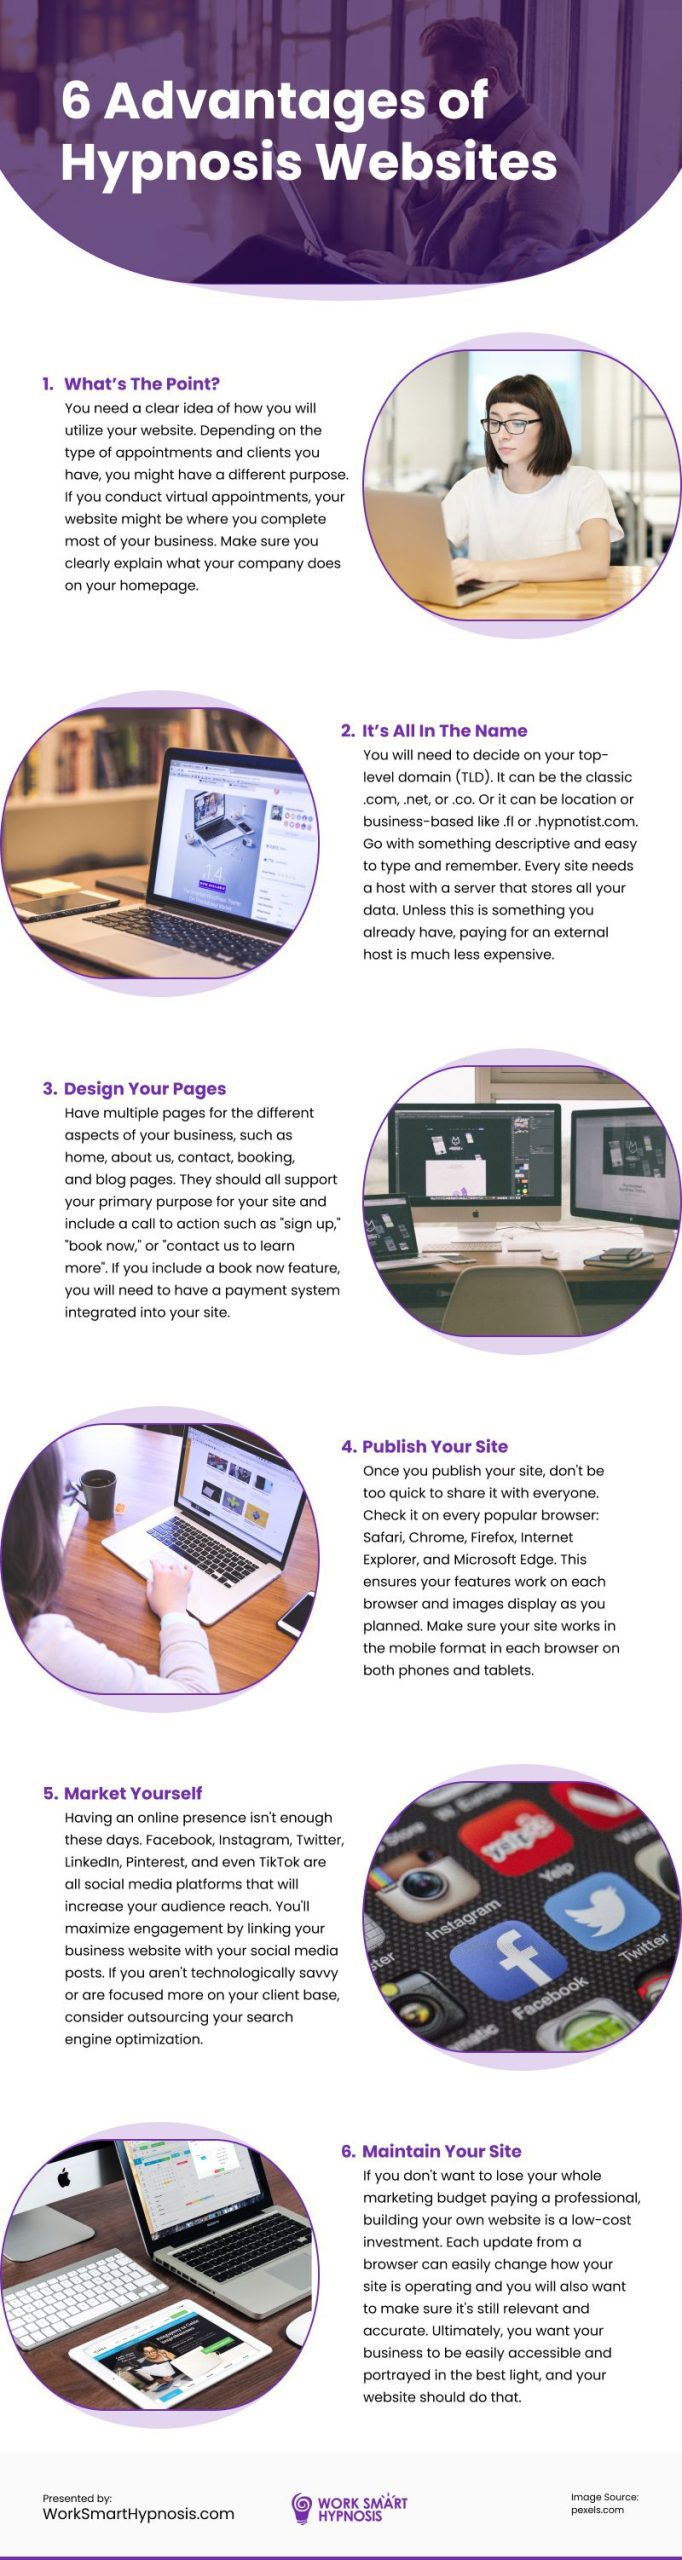 6 Advantages of Hypnosis Websites Infographic